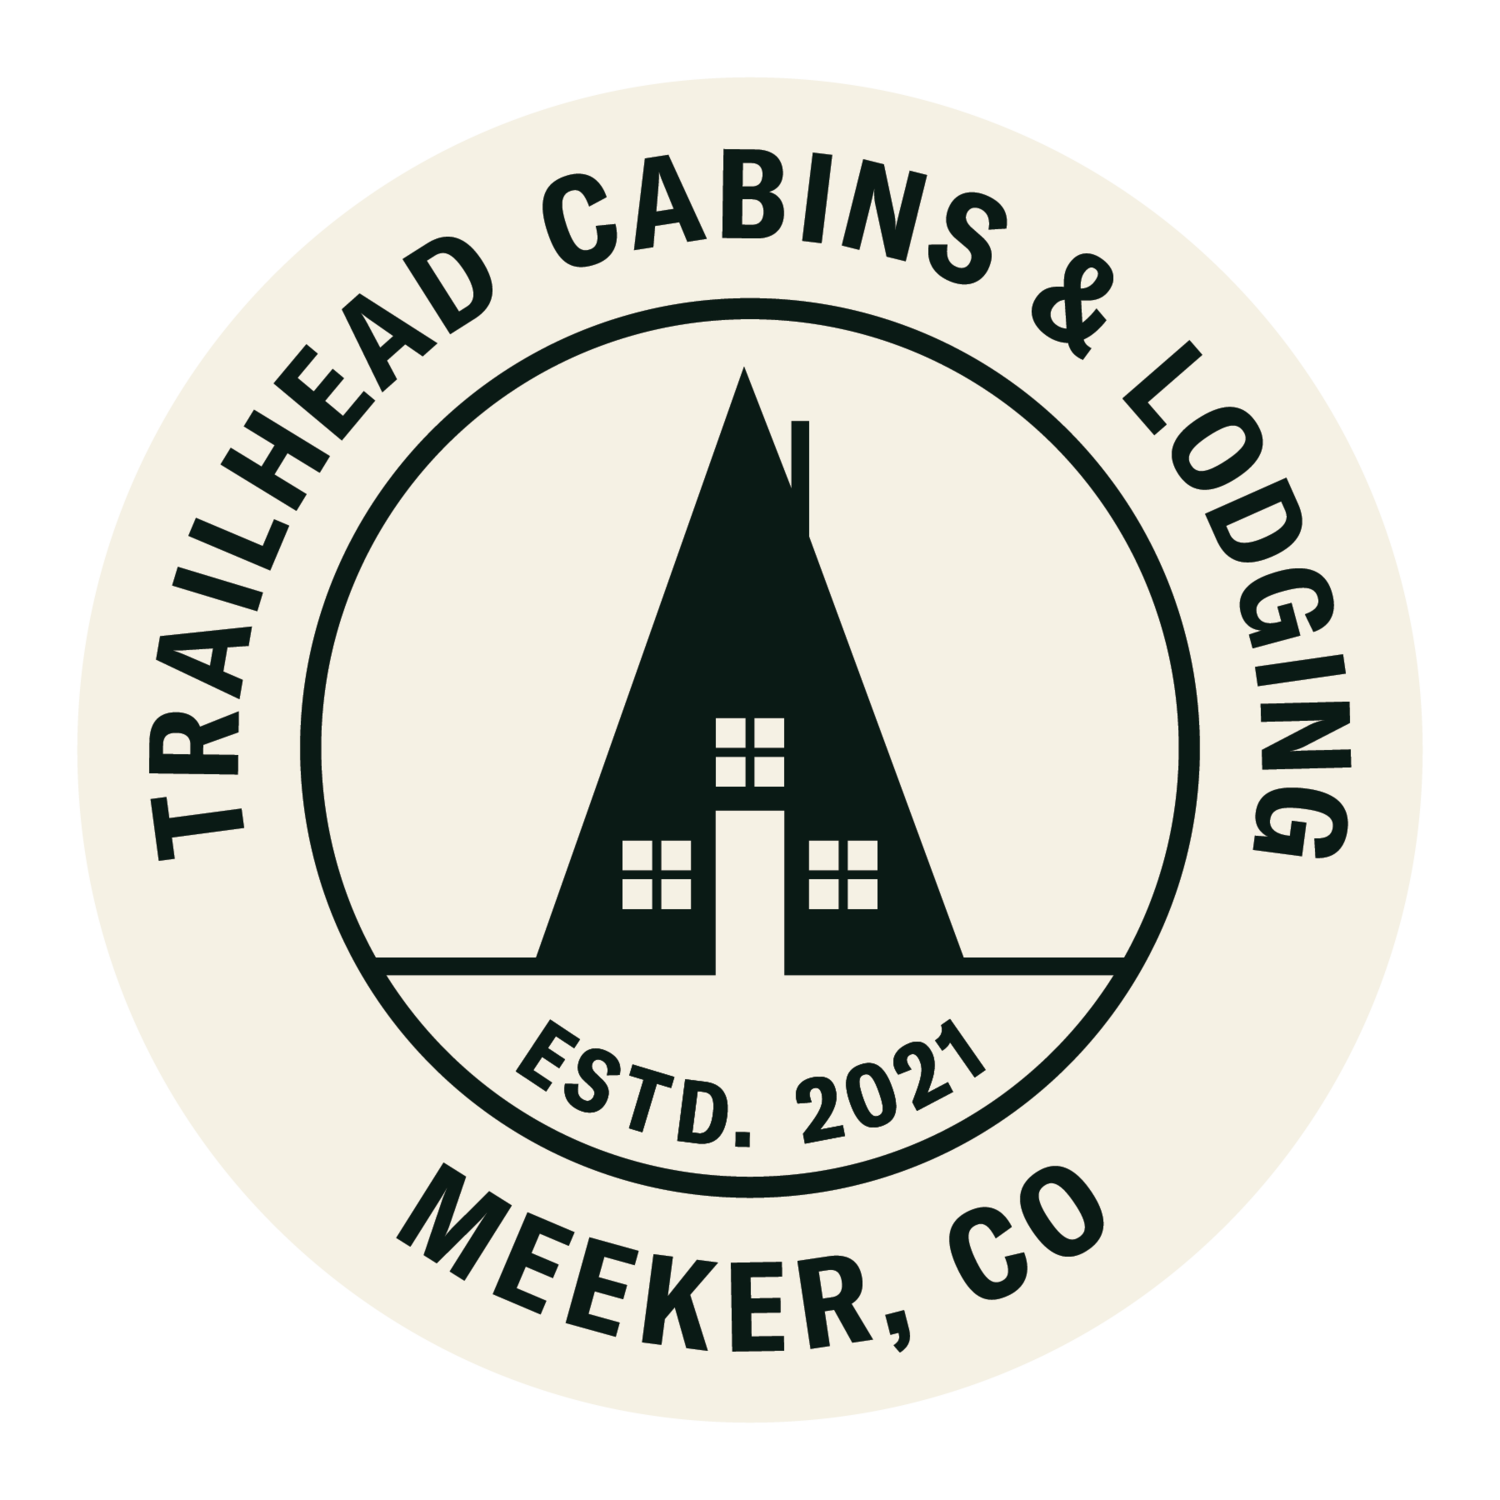 stay-in-meeker-trailhead-cabins-and-lodging